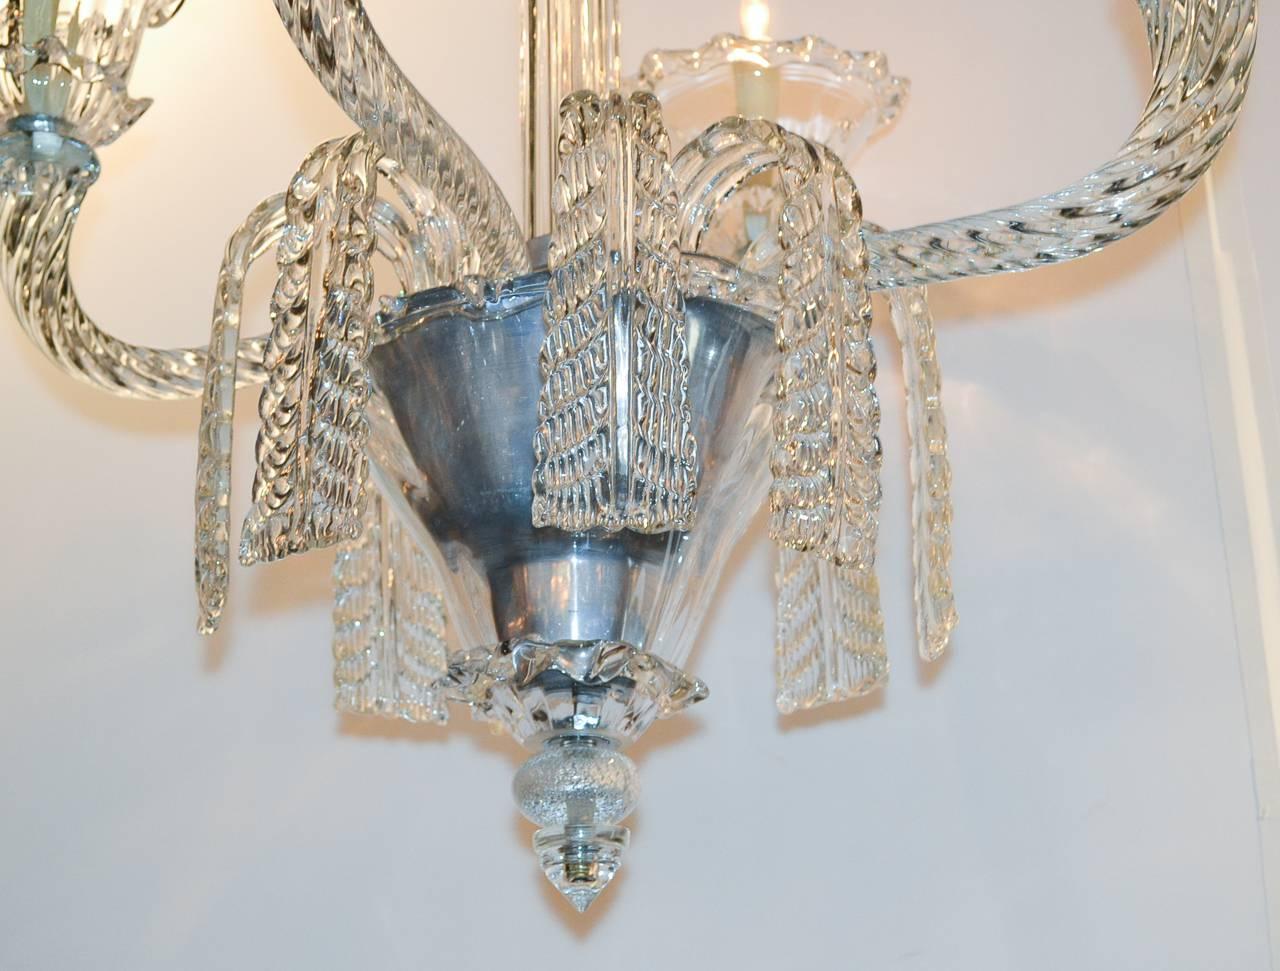 Stunning French heavy glass four-light chandelier. Having graceful arms terminating in large candle cups, impressive central column, and beautiful waterfall swag prisms. 